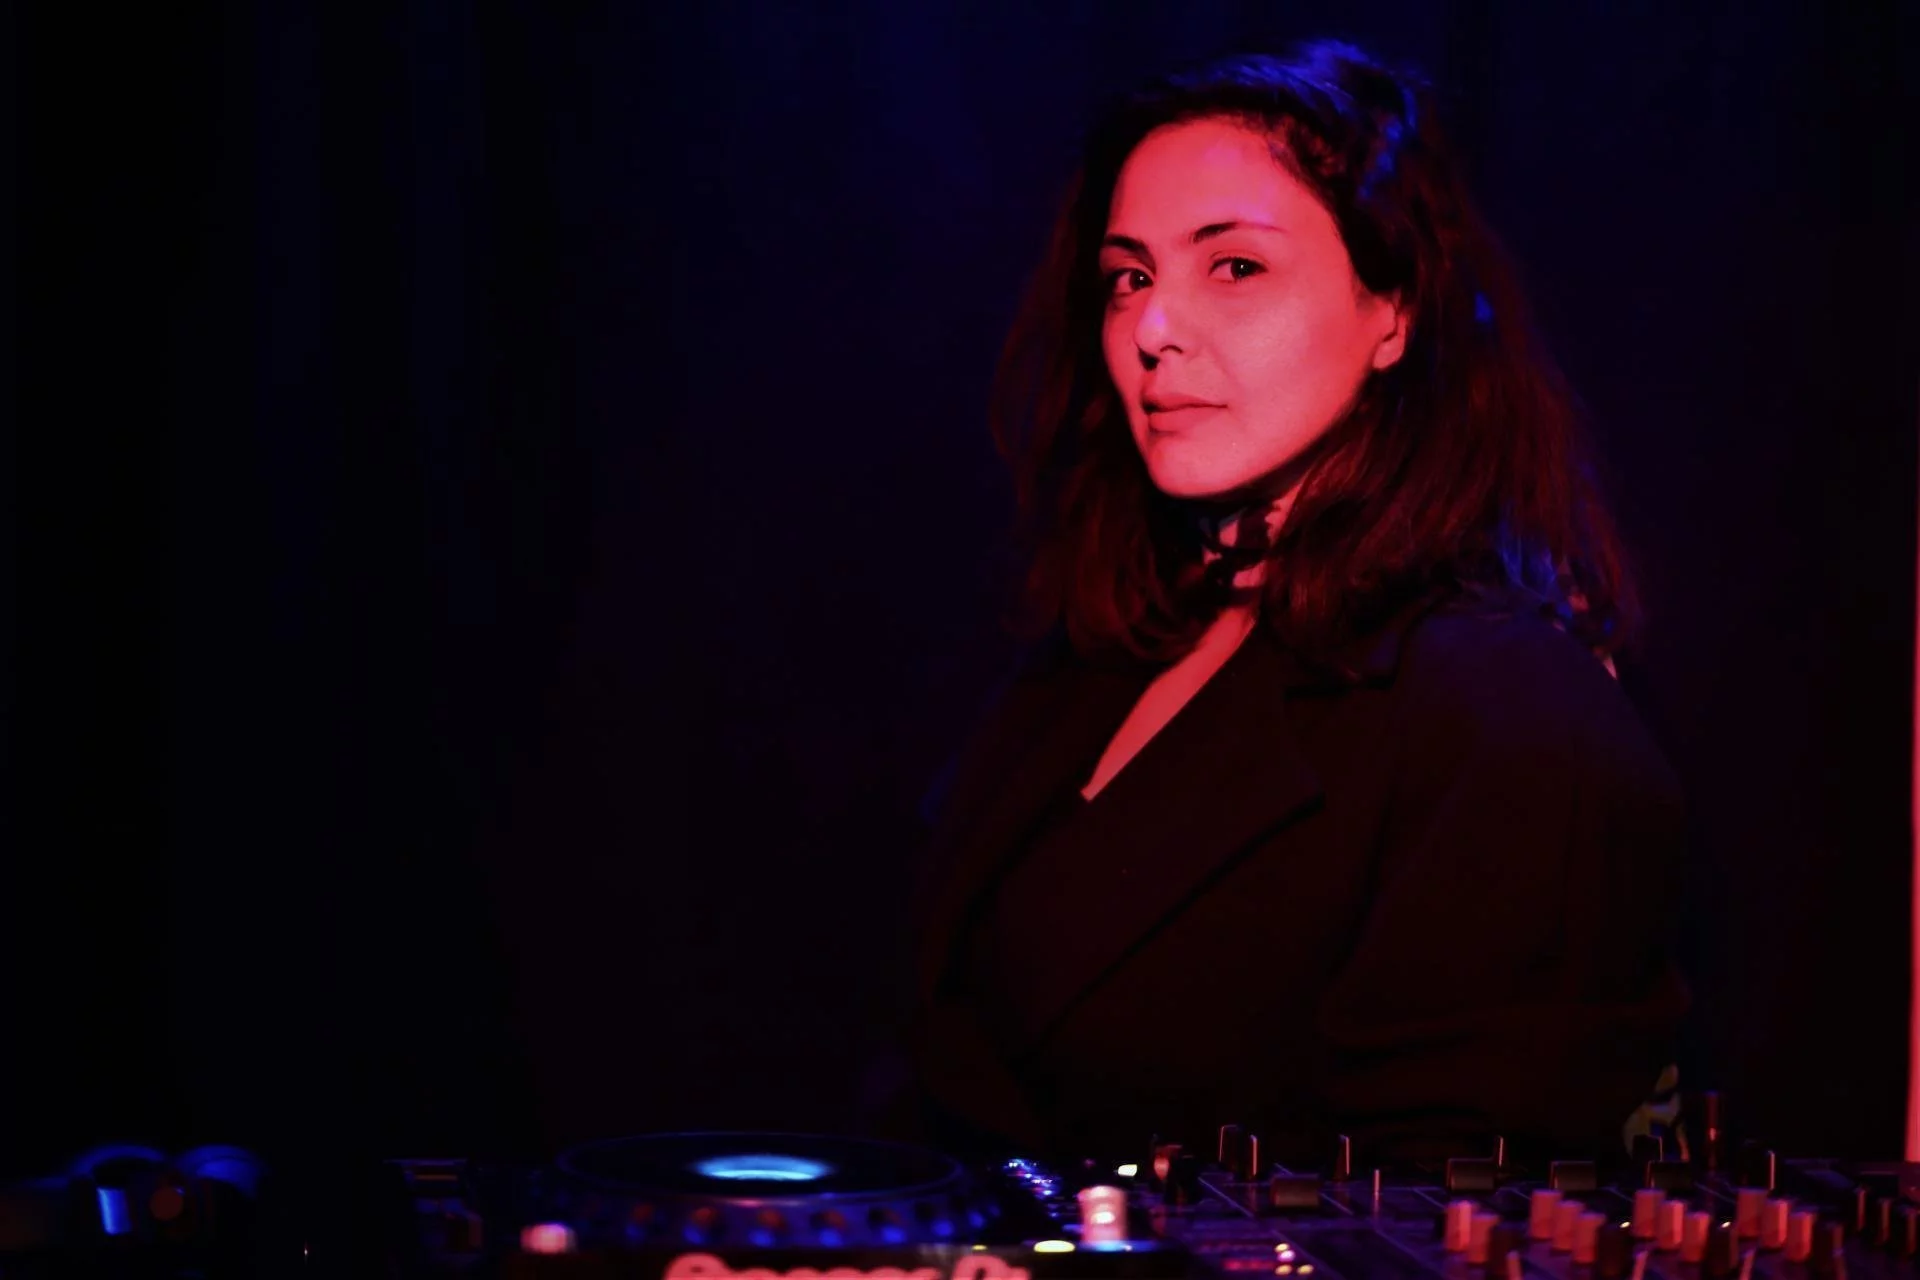 Female DJs stepping up: Interview with Olfa Arfaoui, co-founder of La Fabrique Art Studio